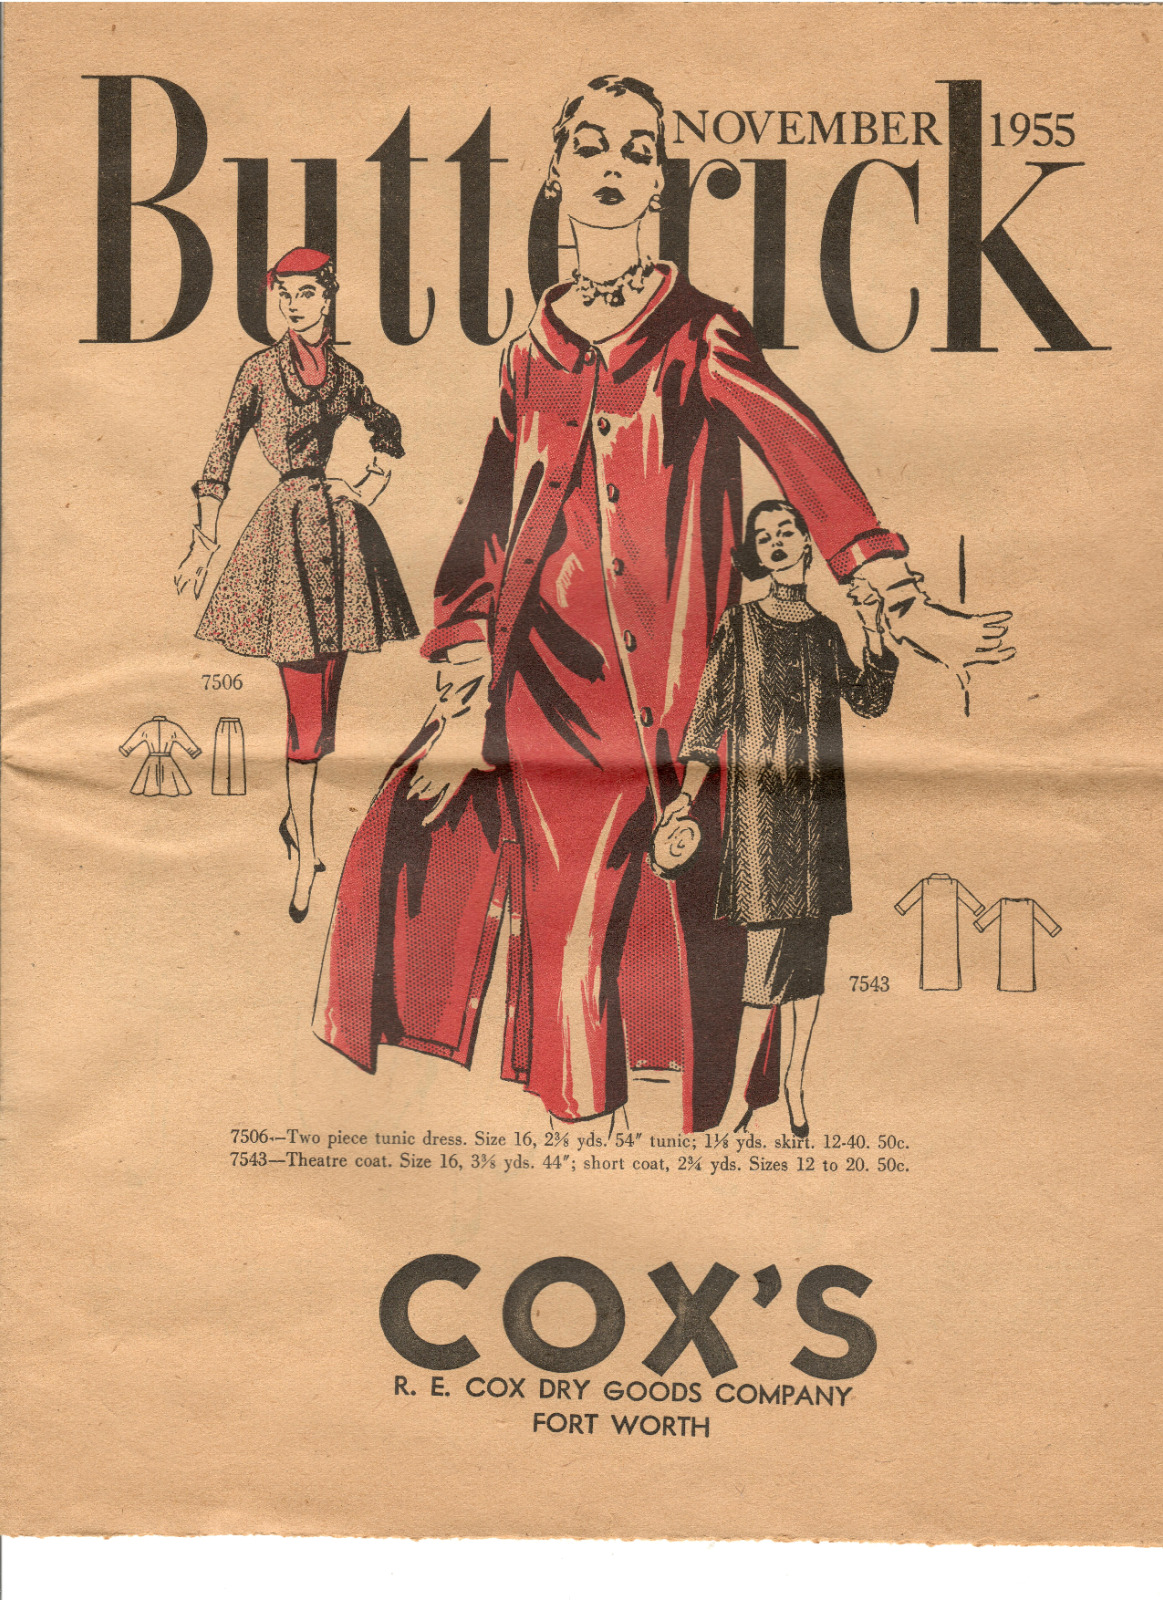 November 1954 Butterick Pattern Advertisement from Cox's in Fort Worth, Texas